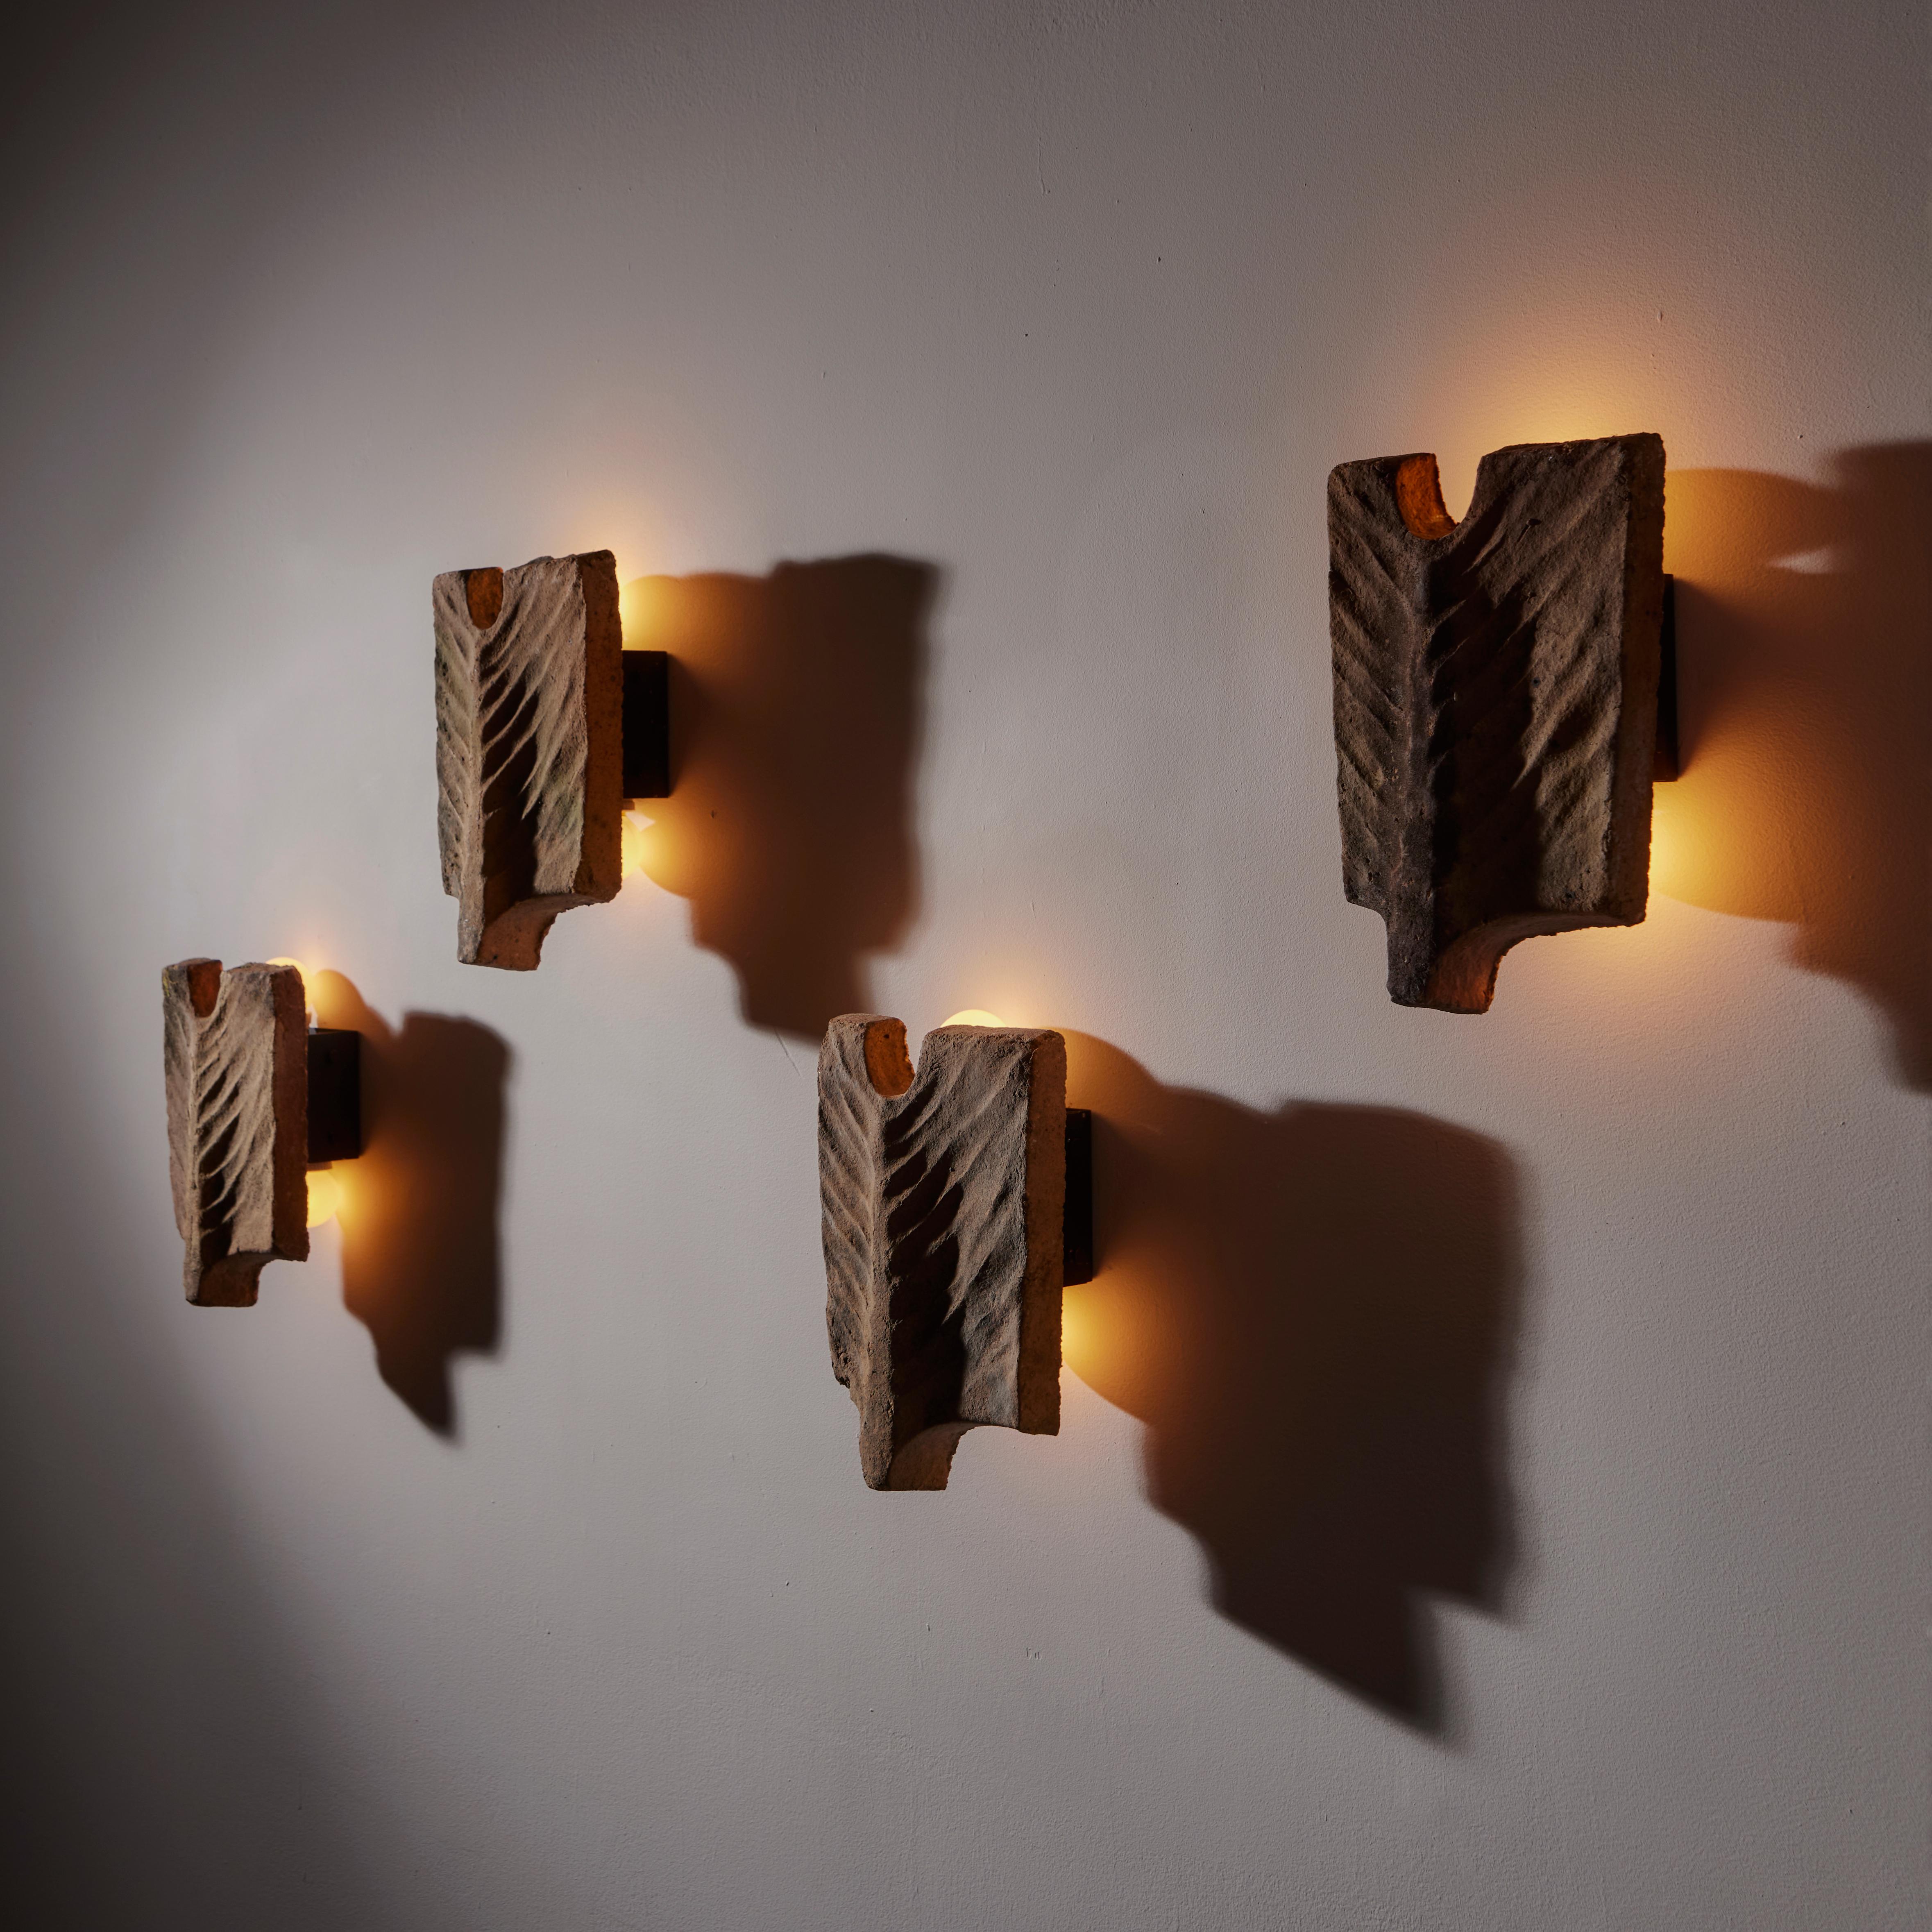 'Palme' sconces by Georges Jouve. Designed and manufactured in France, circa 1950s. Organic and anatomical sandstone forms make up these striking sconces. A steel structure behind the stone holds a double ended socket. Bulbs peak out of the top and